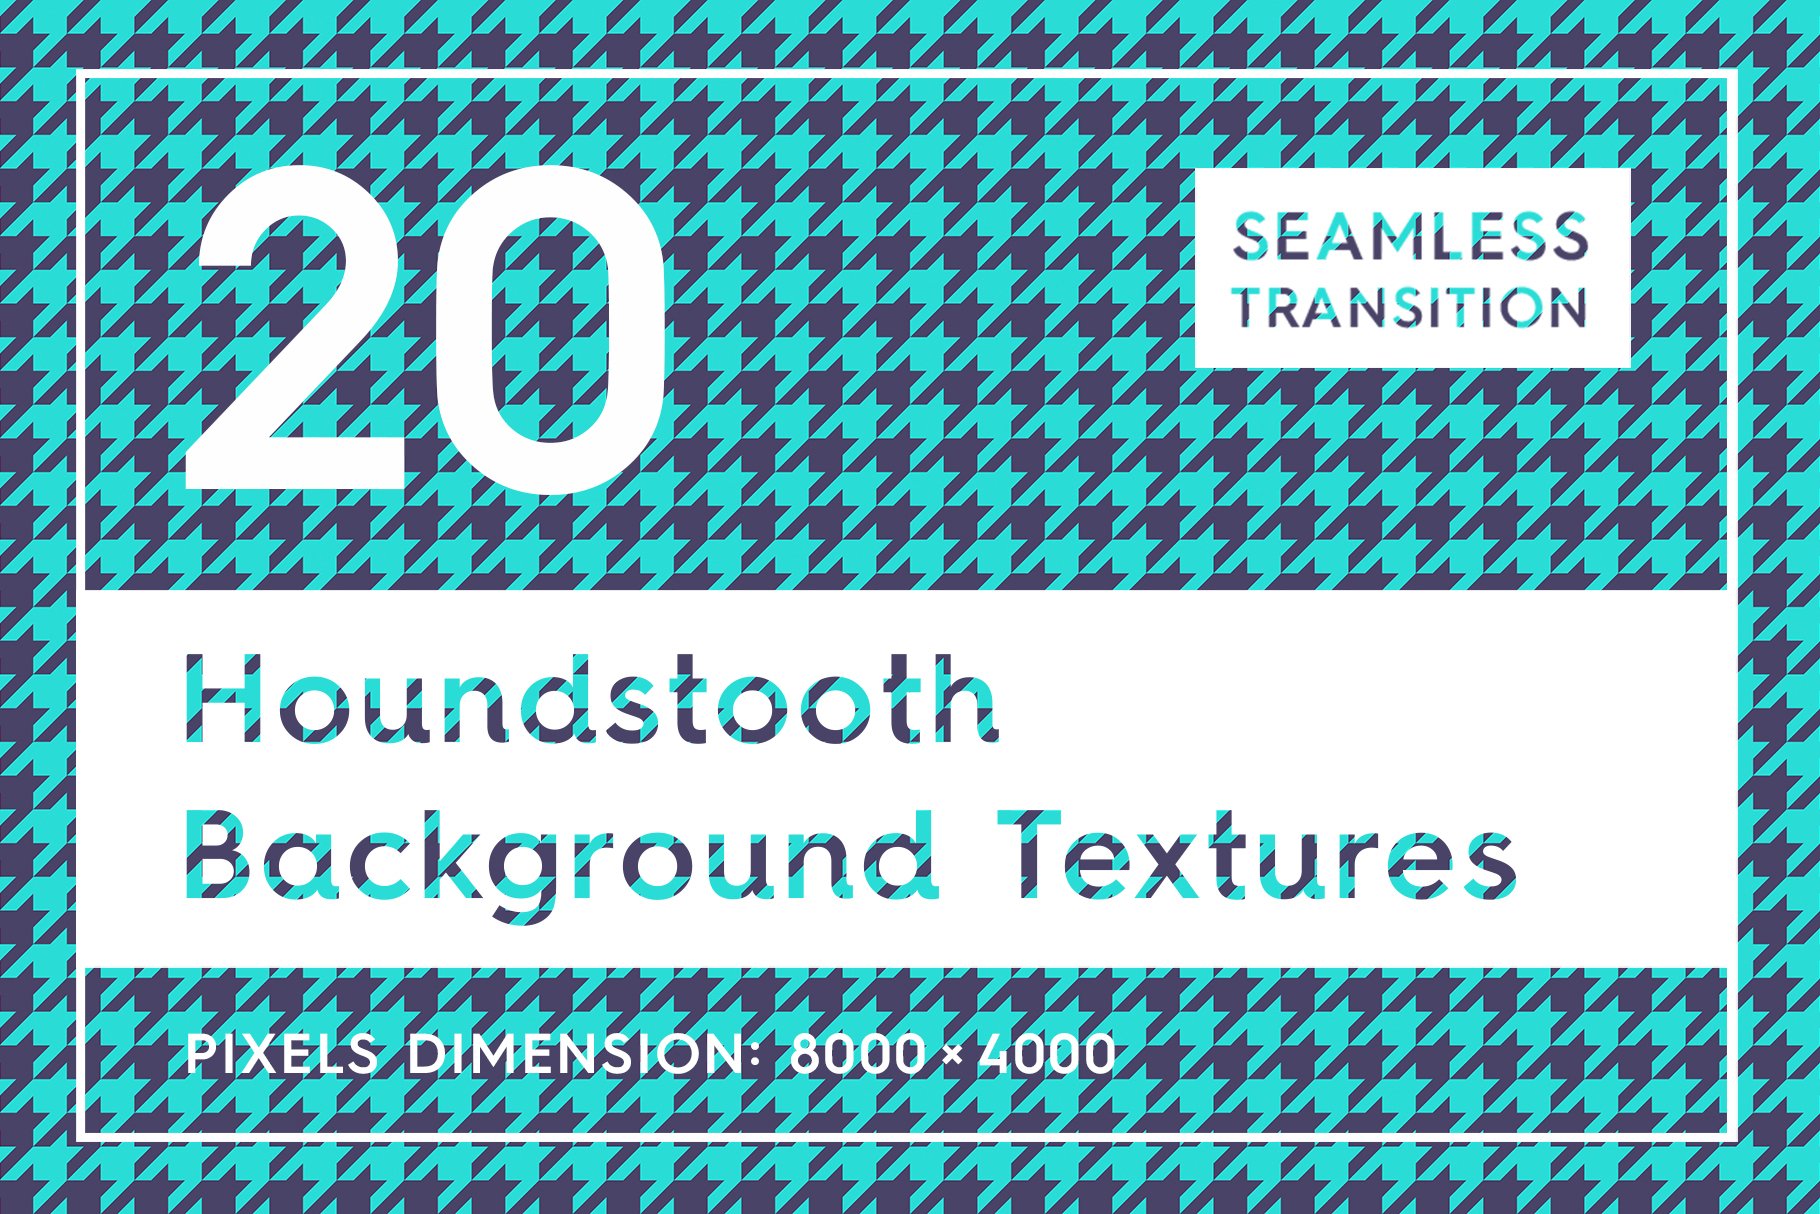 20 Houndstooth Background Textures cover image.